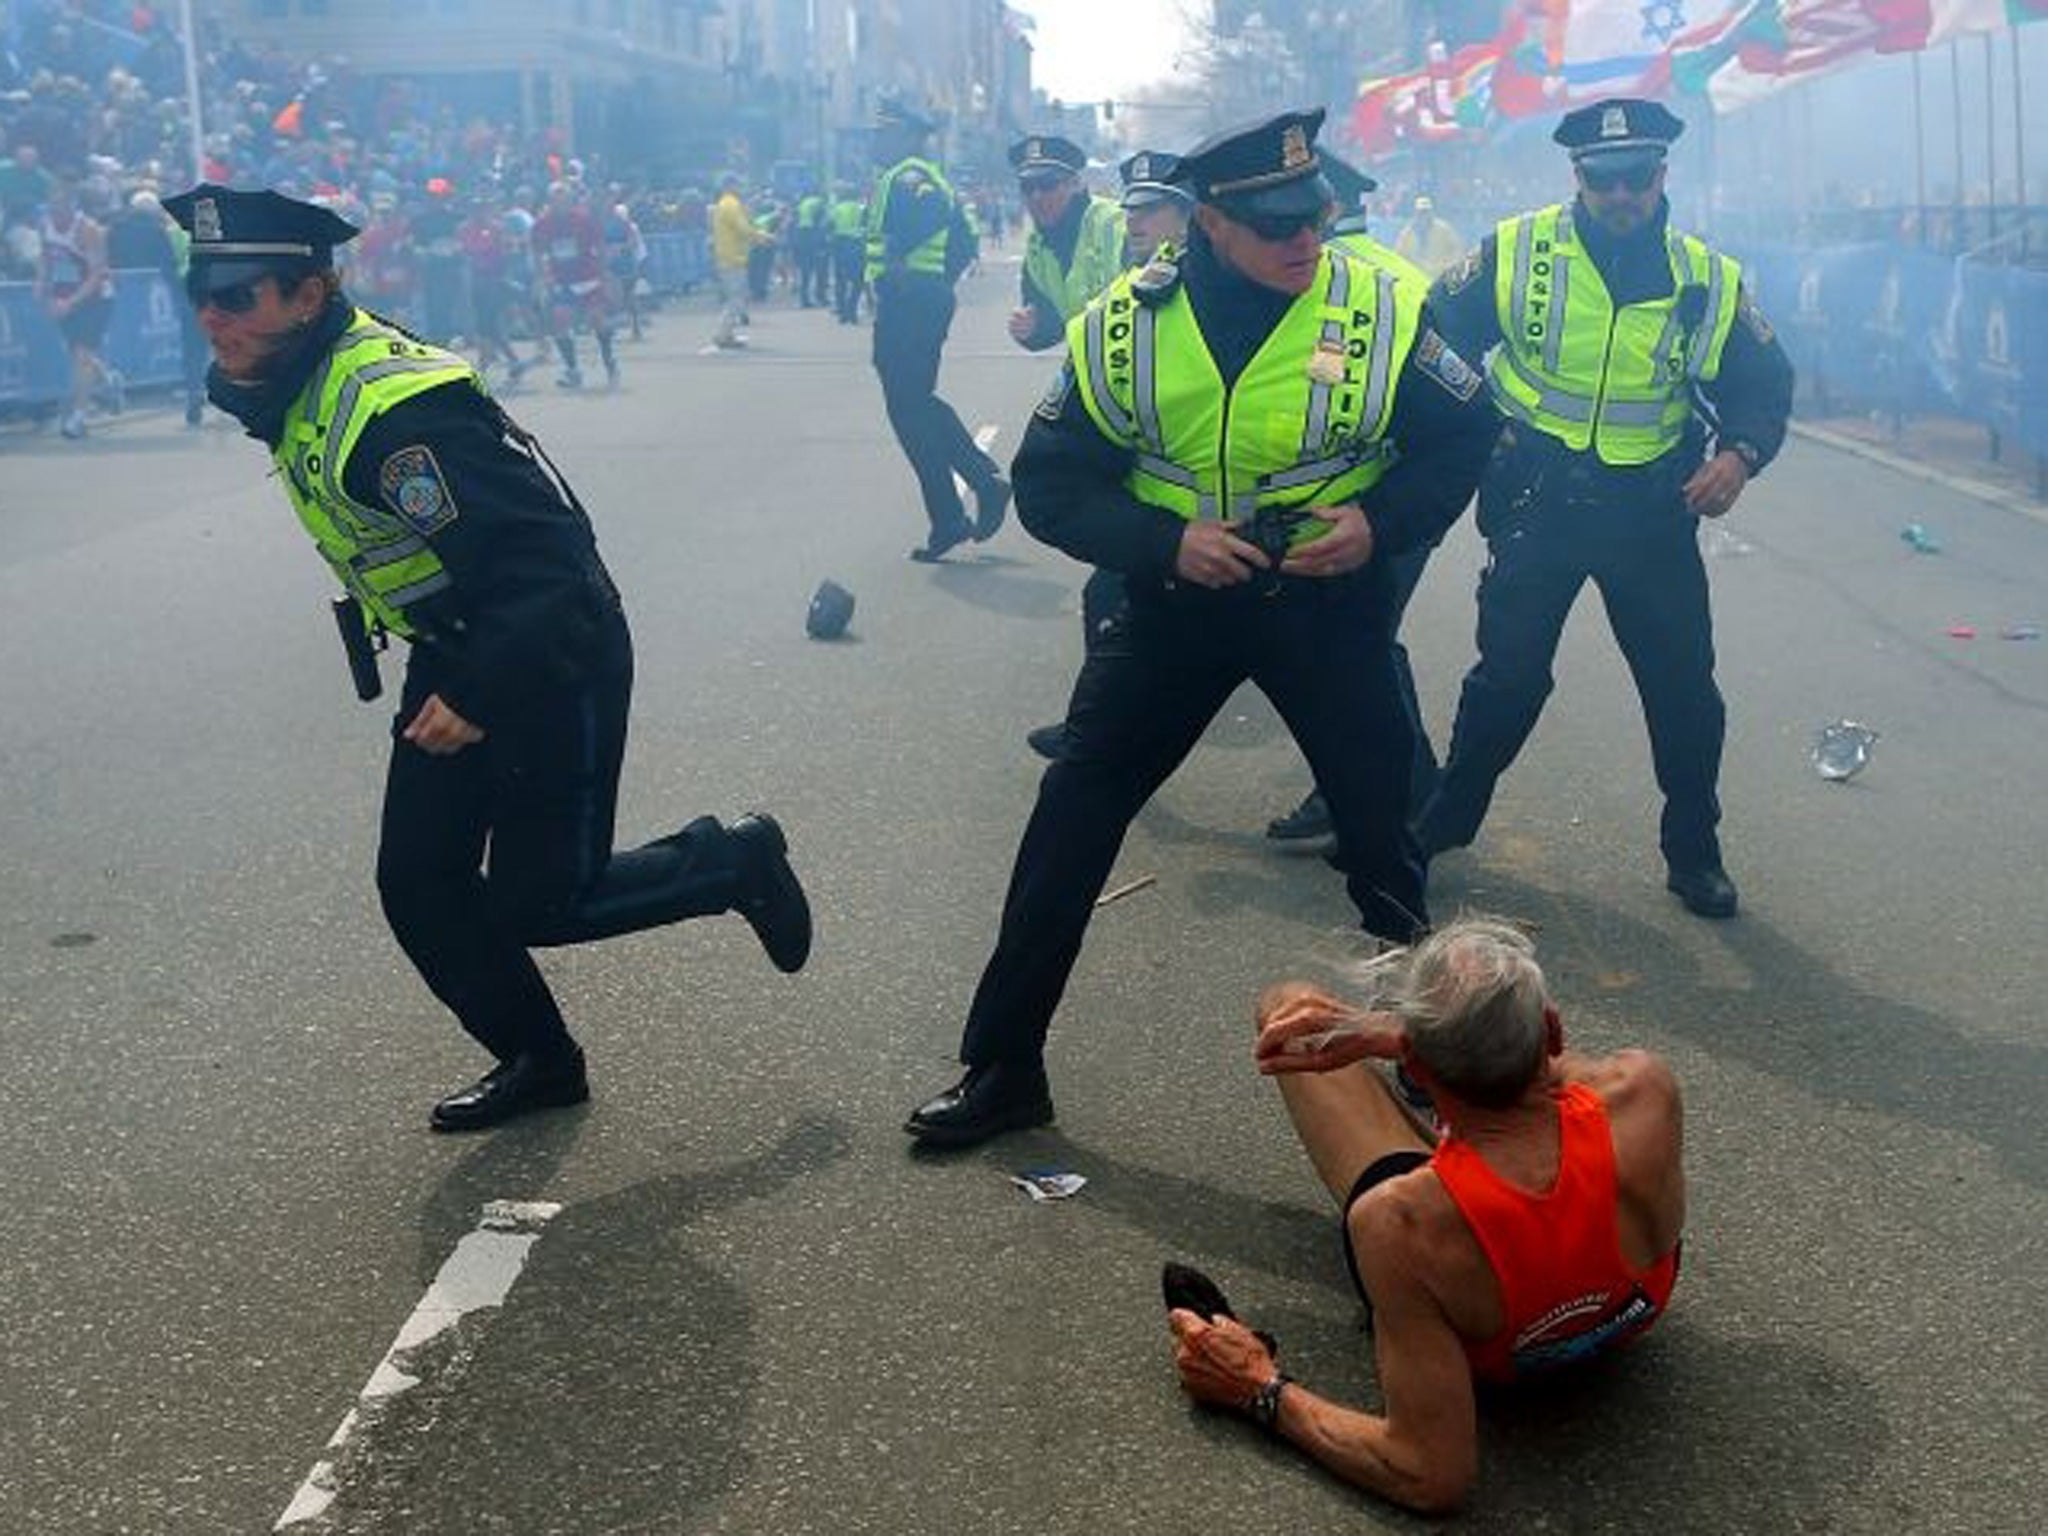 Bill Iffrig, 78, lies on the ground as police officers react to a second explosion at the finish line of the Boston Marathon